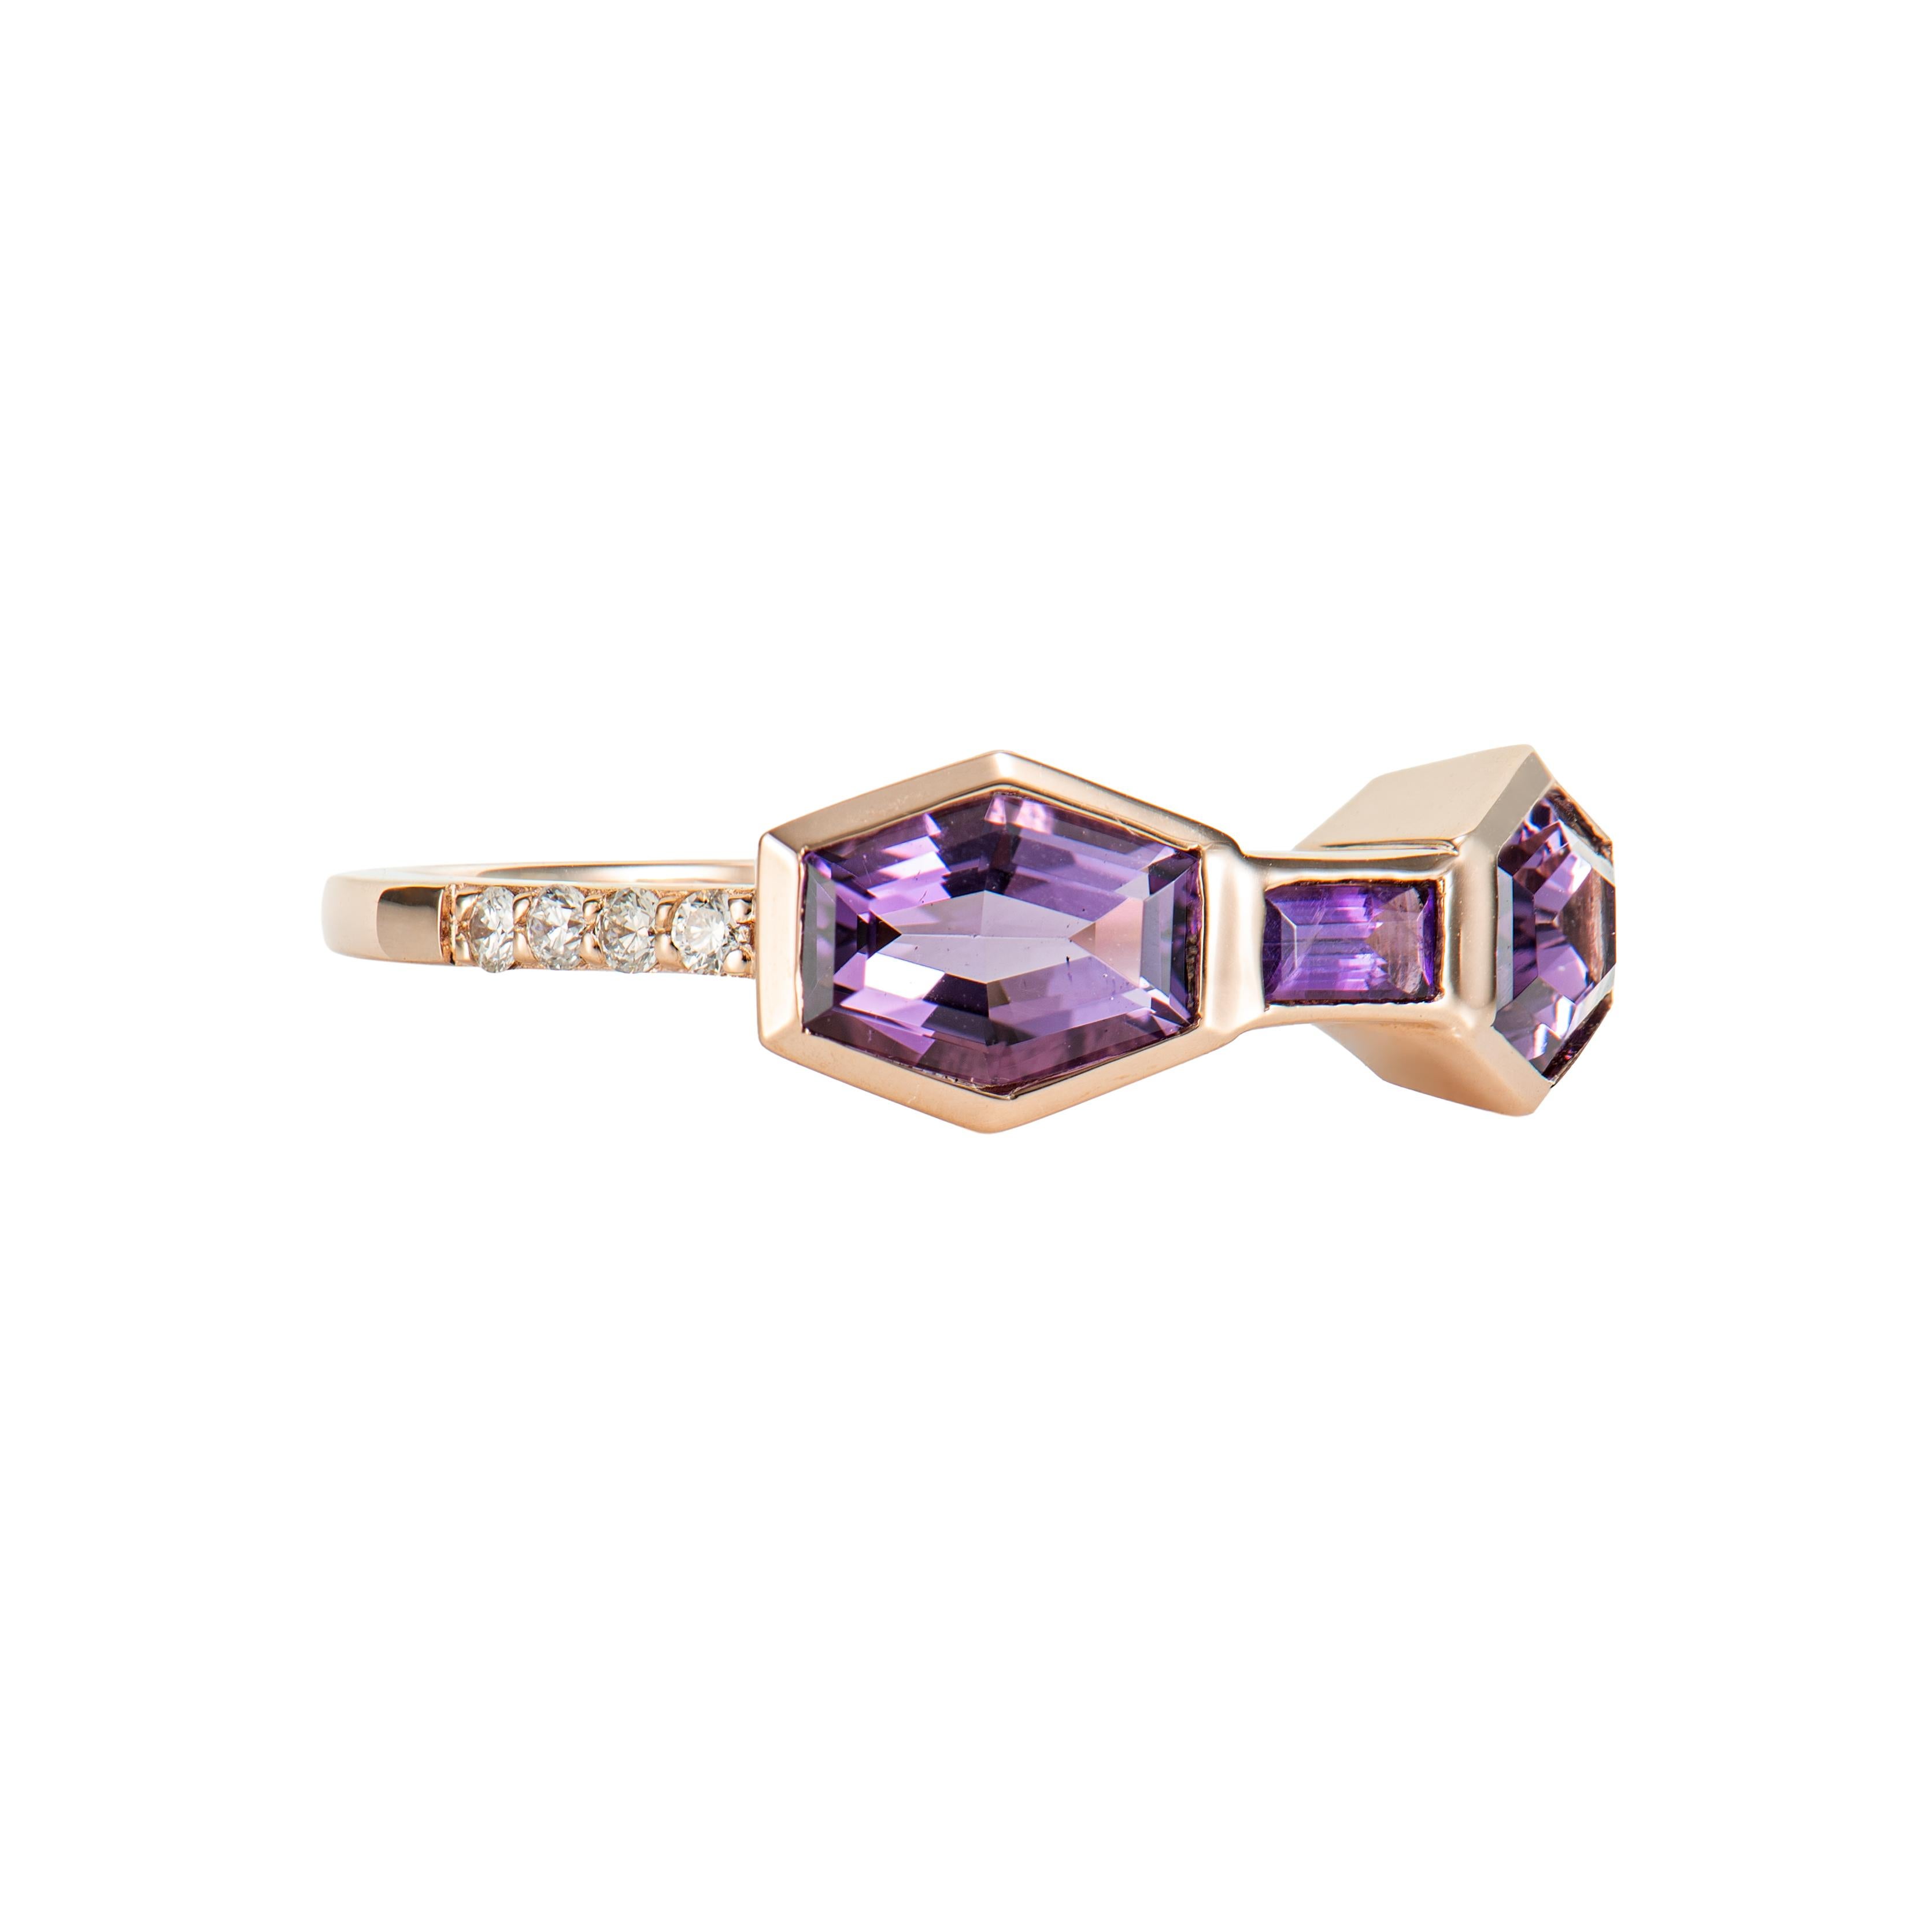 It is Fancy Amethyst Ring in Hexagon shape with purple hue. This rose gold Ring have a timeless, elegant appearance and can be worn on different occasions.

Amethyst Ring in 14Karat Rose Gold with White Diamond.

Amethyst: 1.49 carat, 7X5mm size,